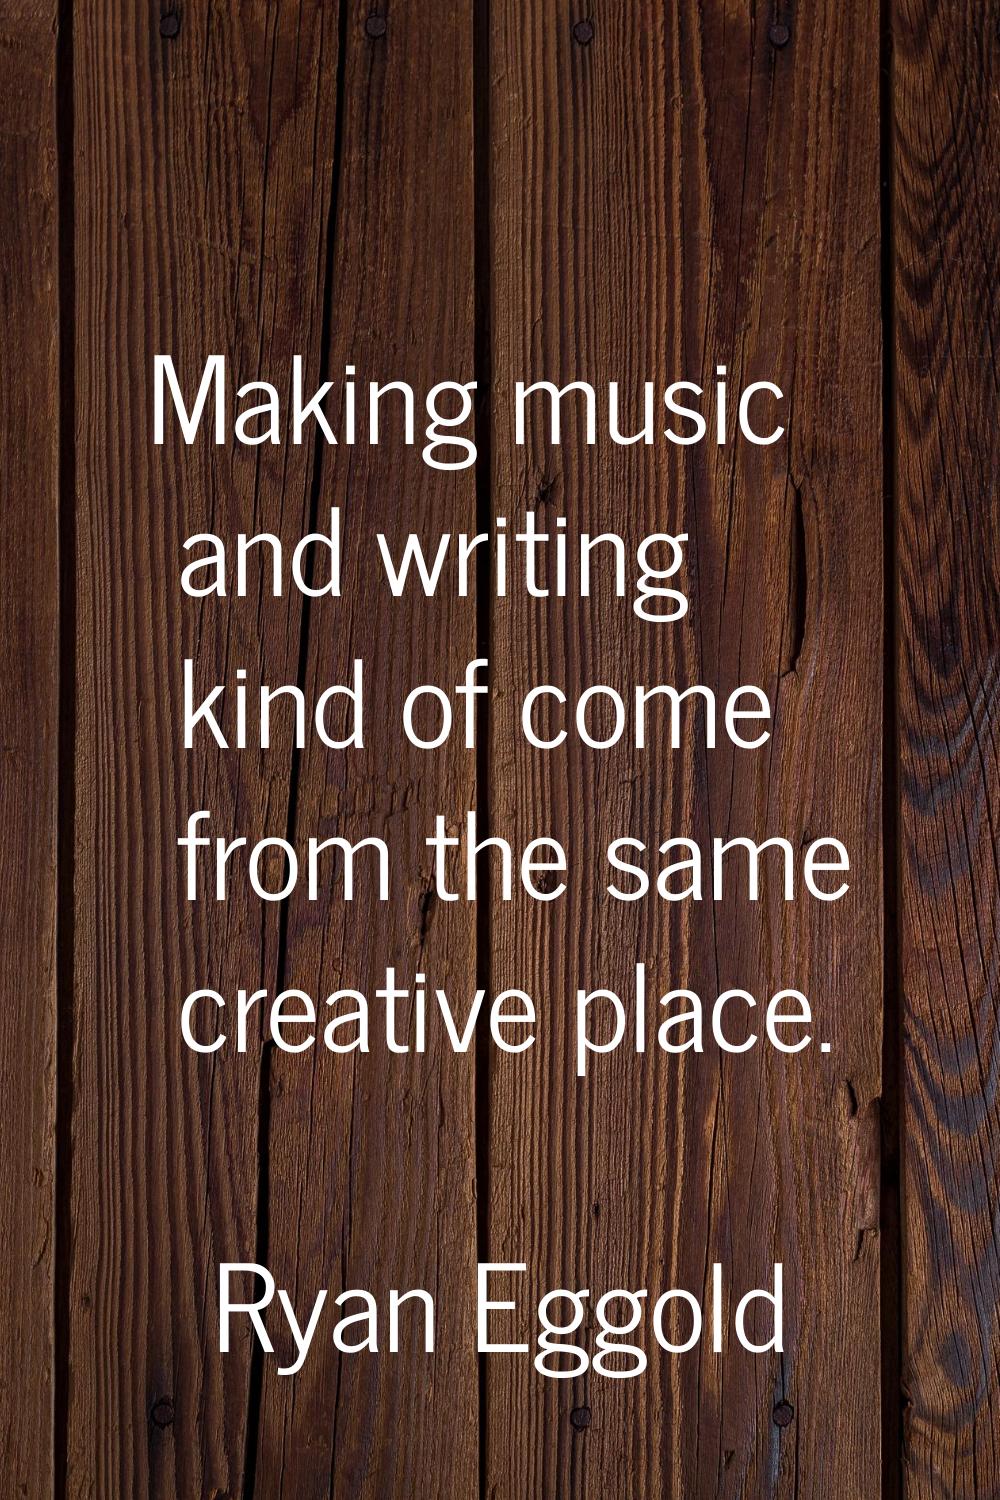 Making music and writing kind of come from the same creative place.